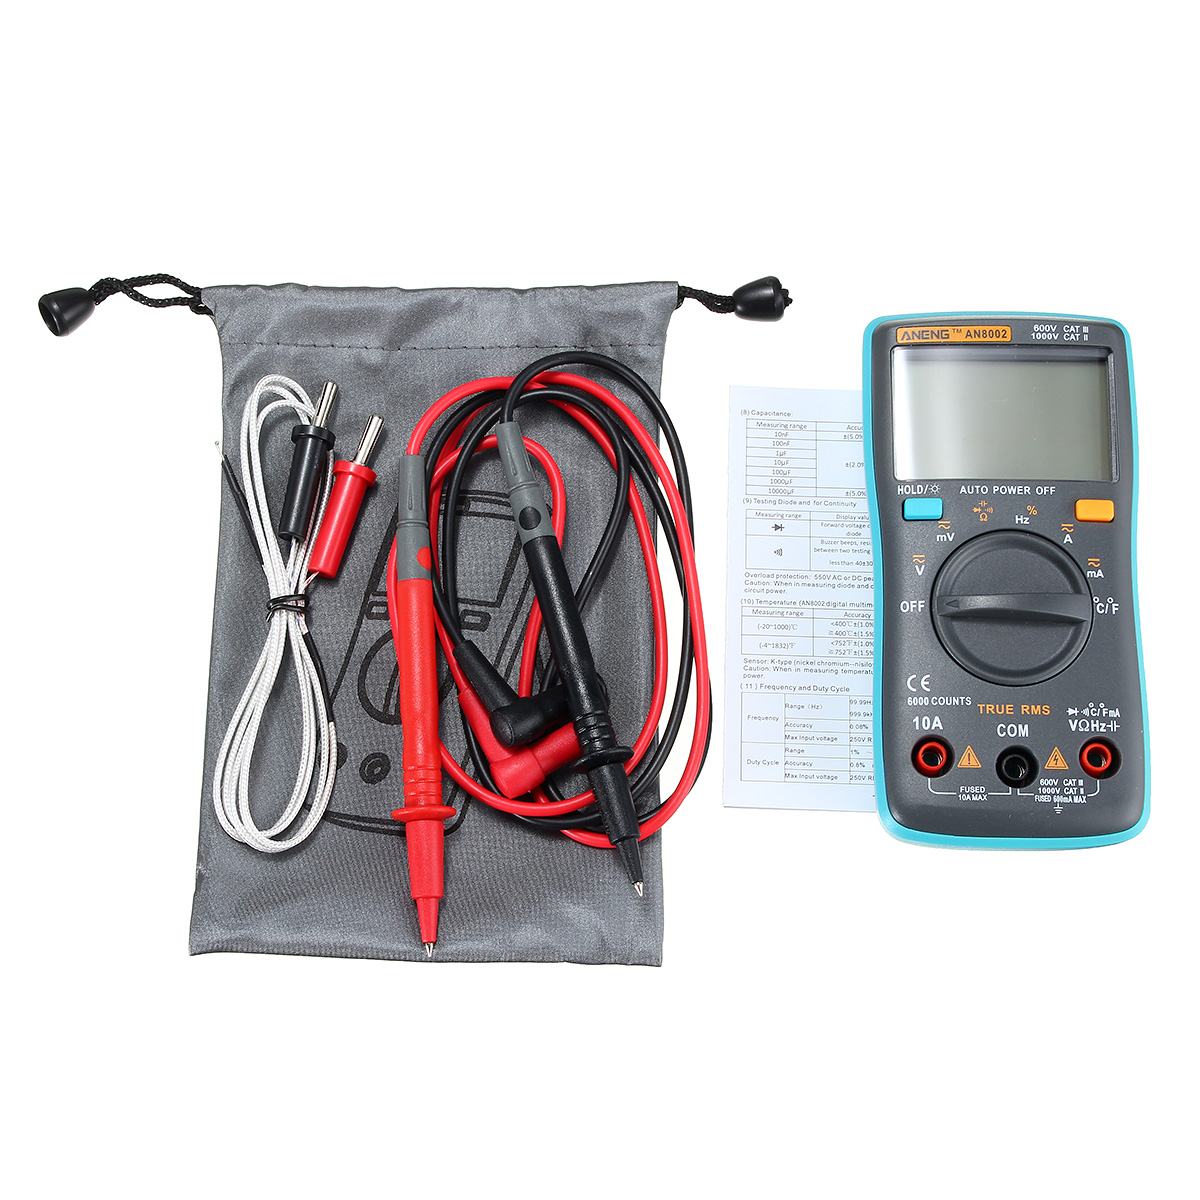 ANENG AN8002 Digital True RMS 6000 Counts Multimeter AC/DC Current Voltage Frequency Resistance Temperature Tester ℃/℉ 64